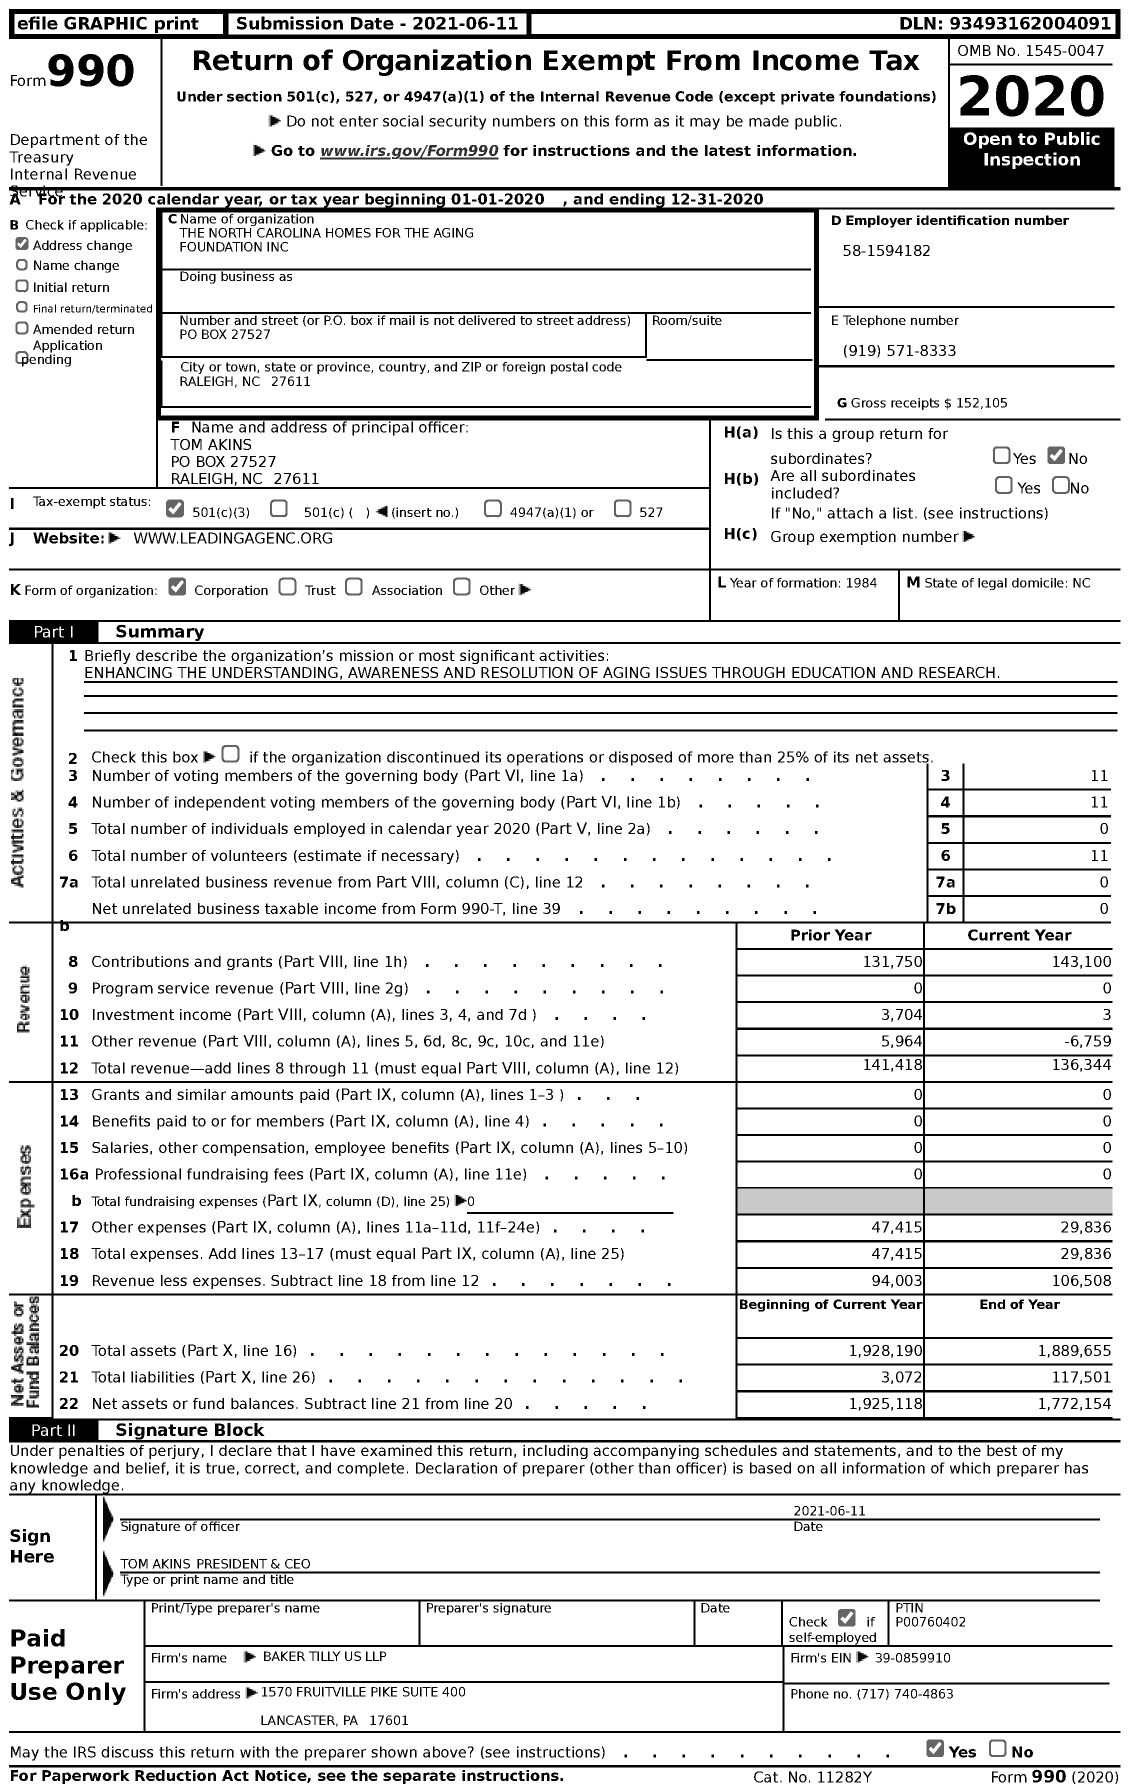 Image of first page of 2020 Form 990 for The North Carolina Homes for the Aging Foundation